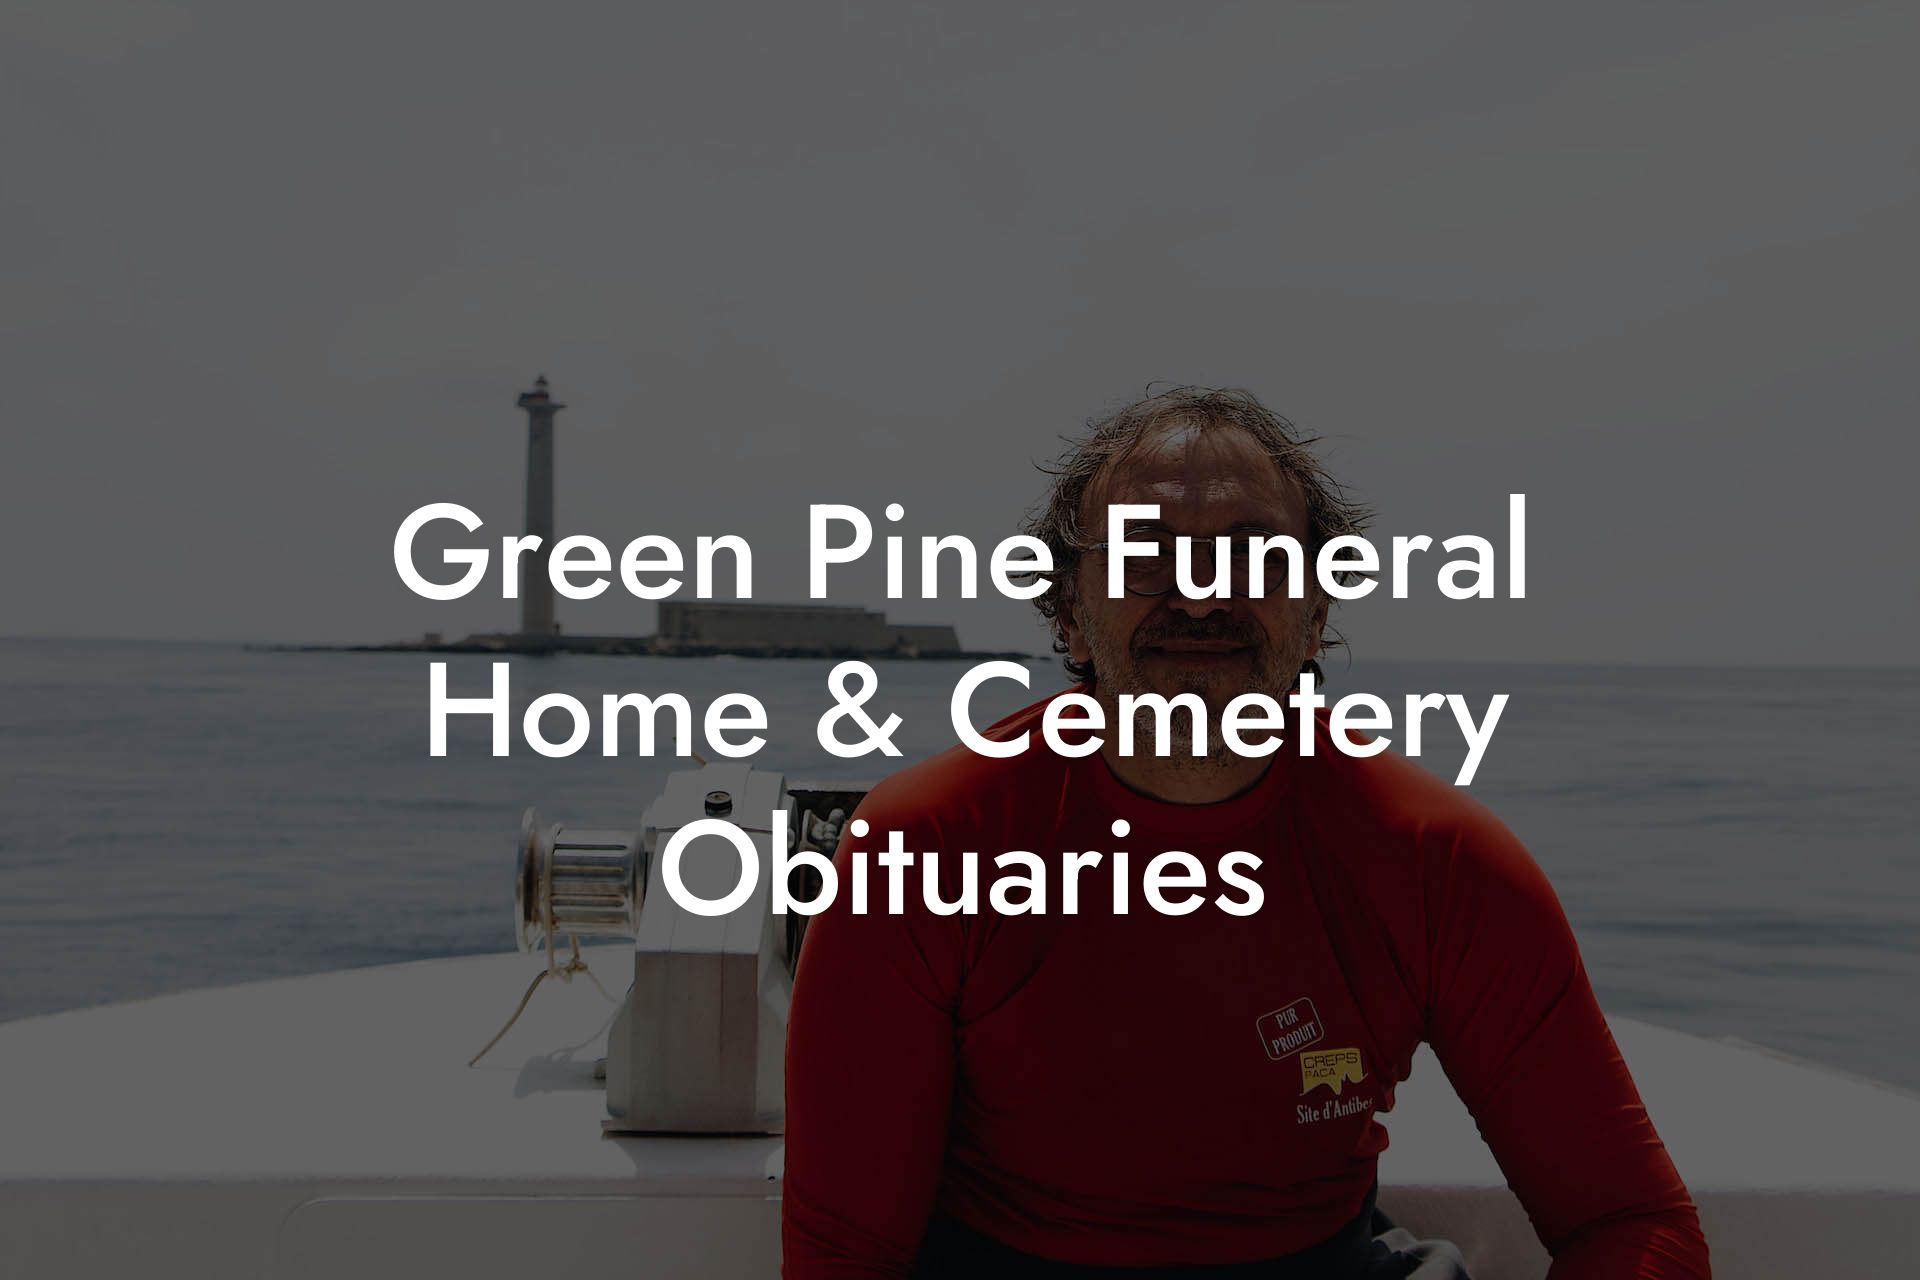 Green Pine Funeral Home & Cemetery Obituaries